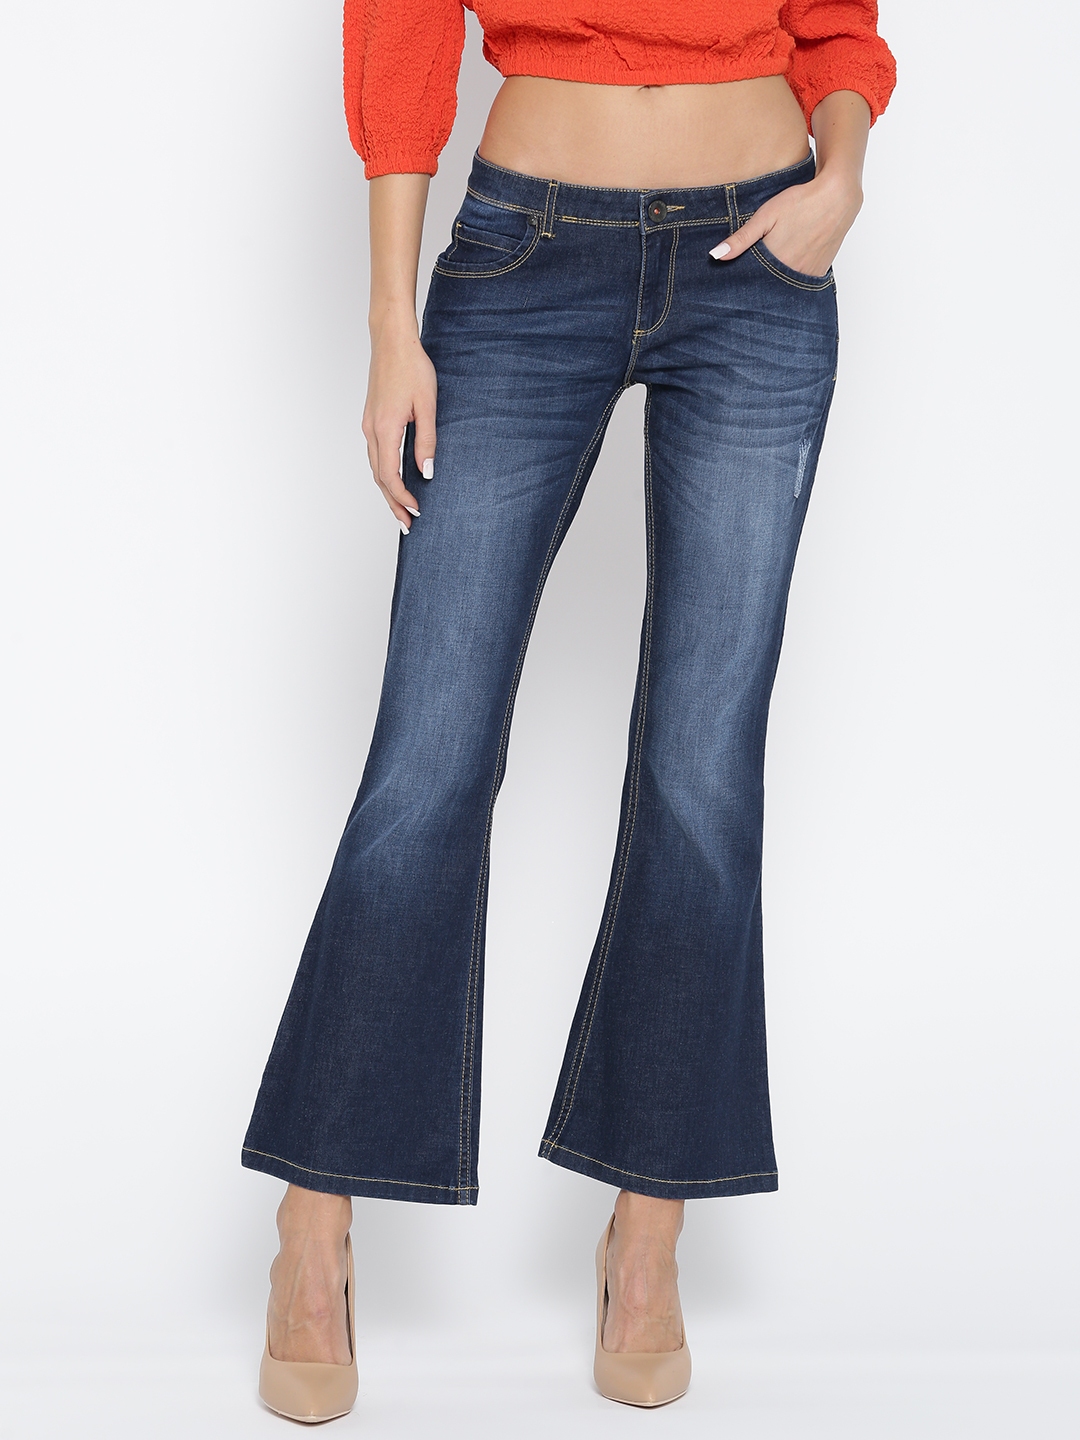 Buy United Colors Of Benetton Women Navy Bootcut Low Distress ...